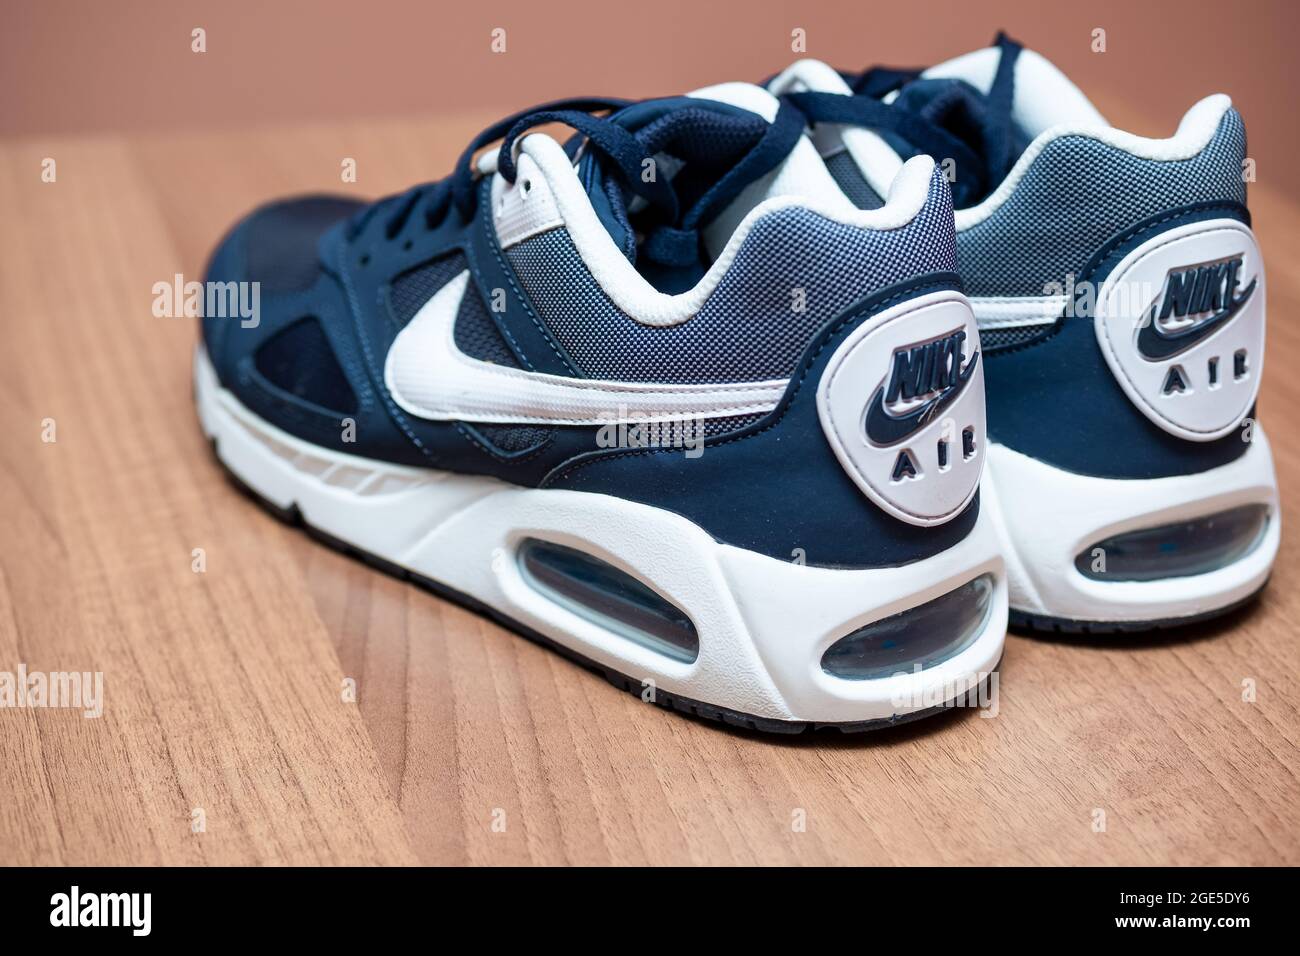 Norwich, Norfolk, UK – August 16 2021. Close and selective focus on navy  blue Nike Air Max trainers or sneakers for men Stock Photo - Alamy